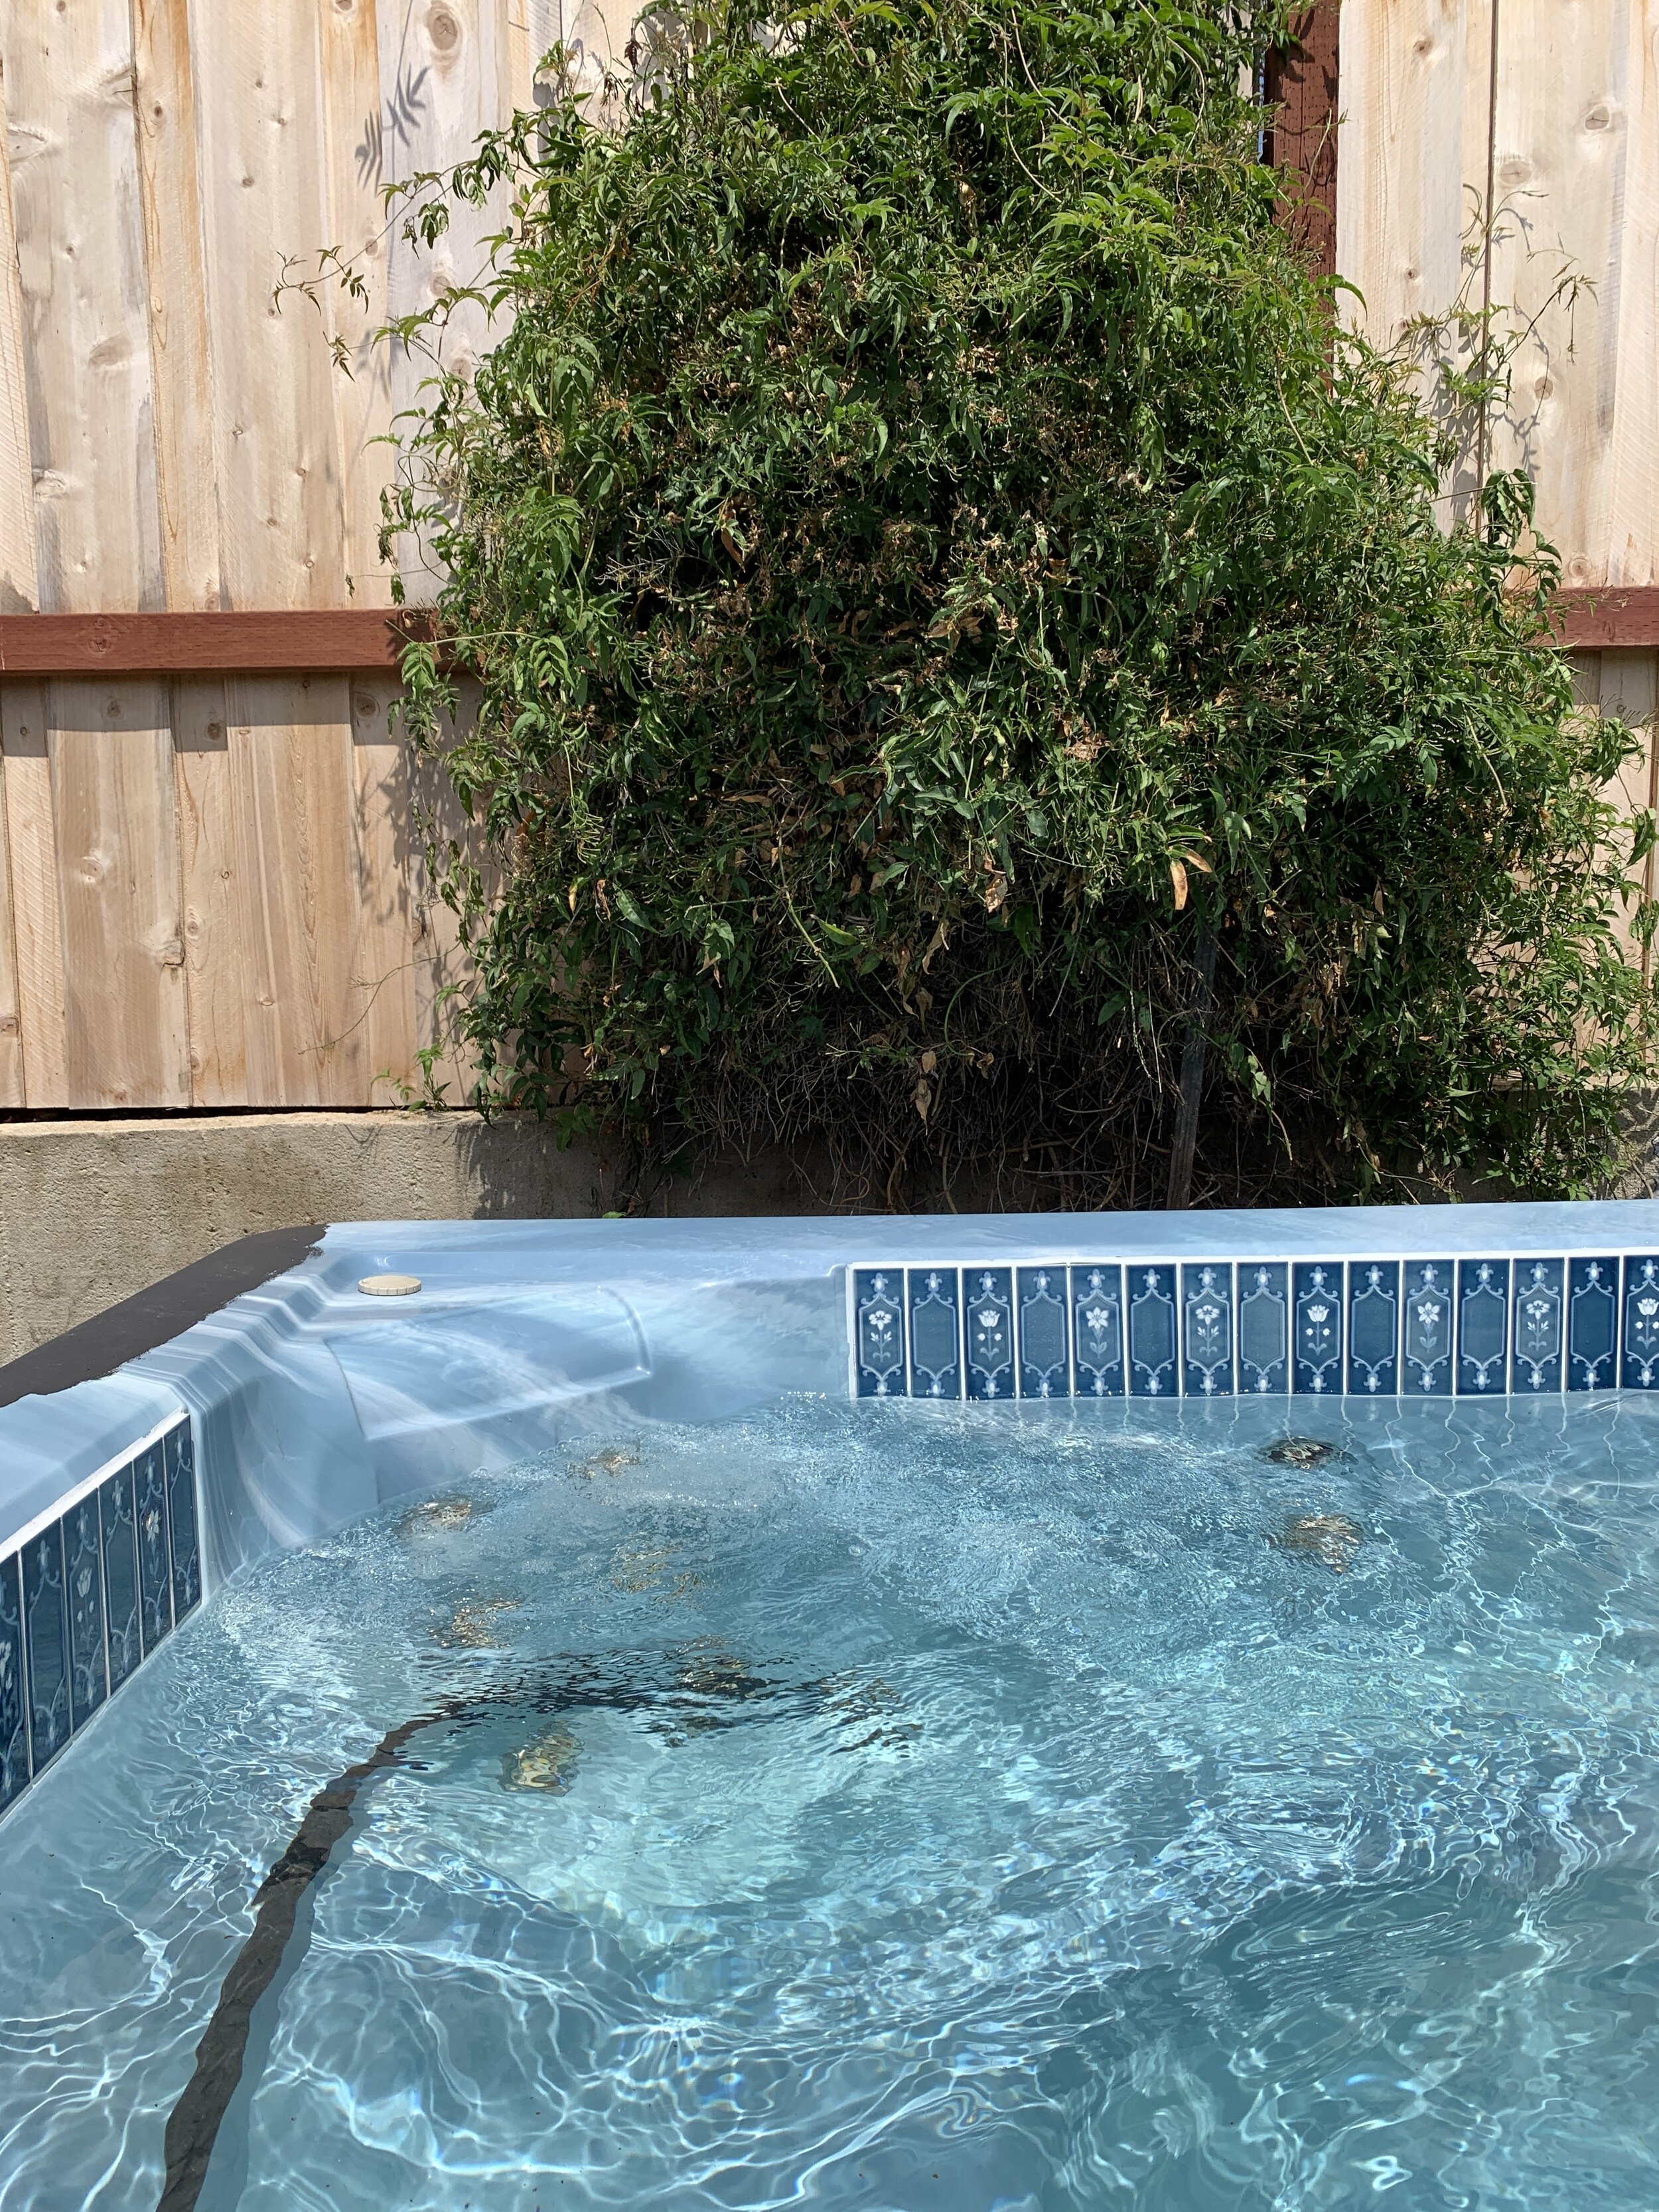 I Converted Our Giant Hot Tub Into A Cold Pool For The Summertime